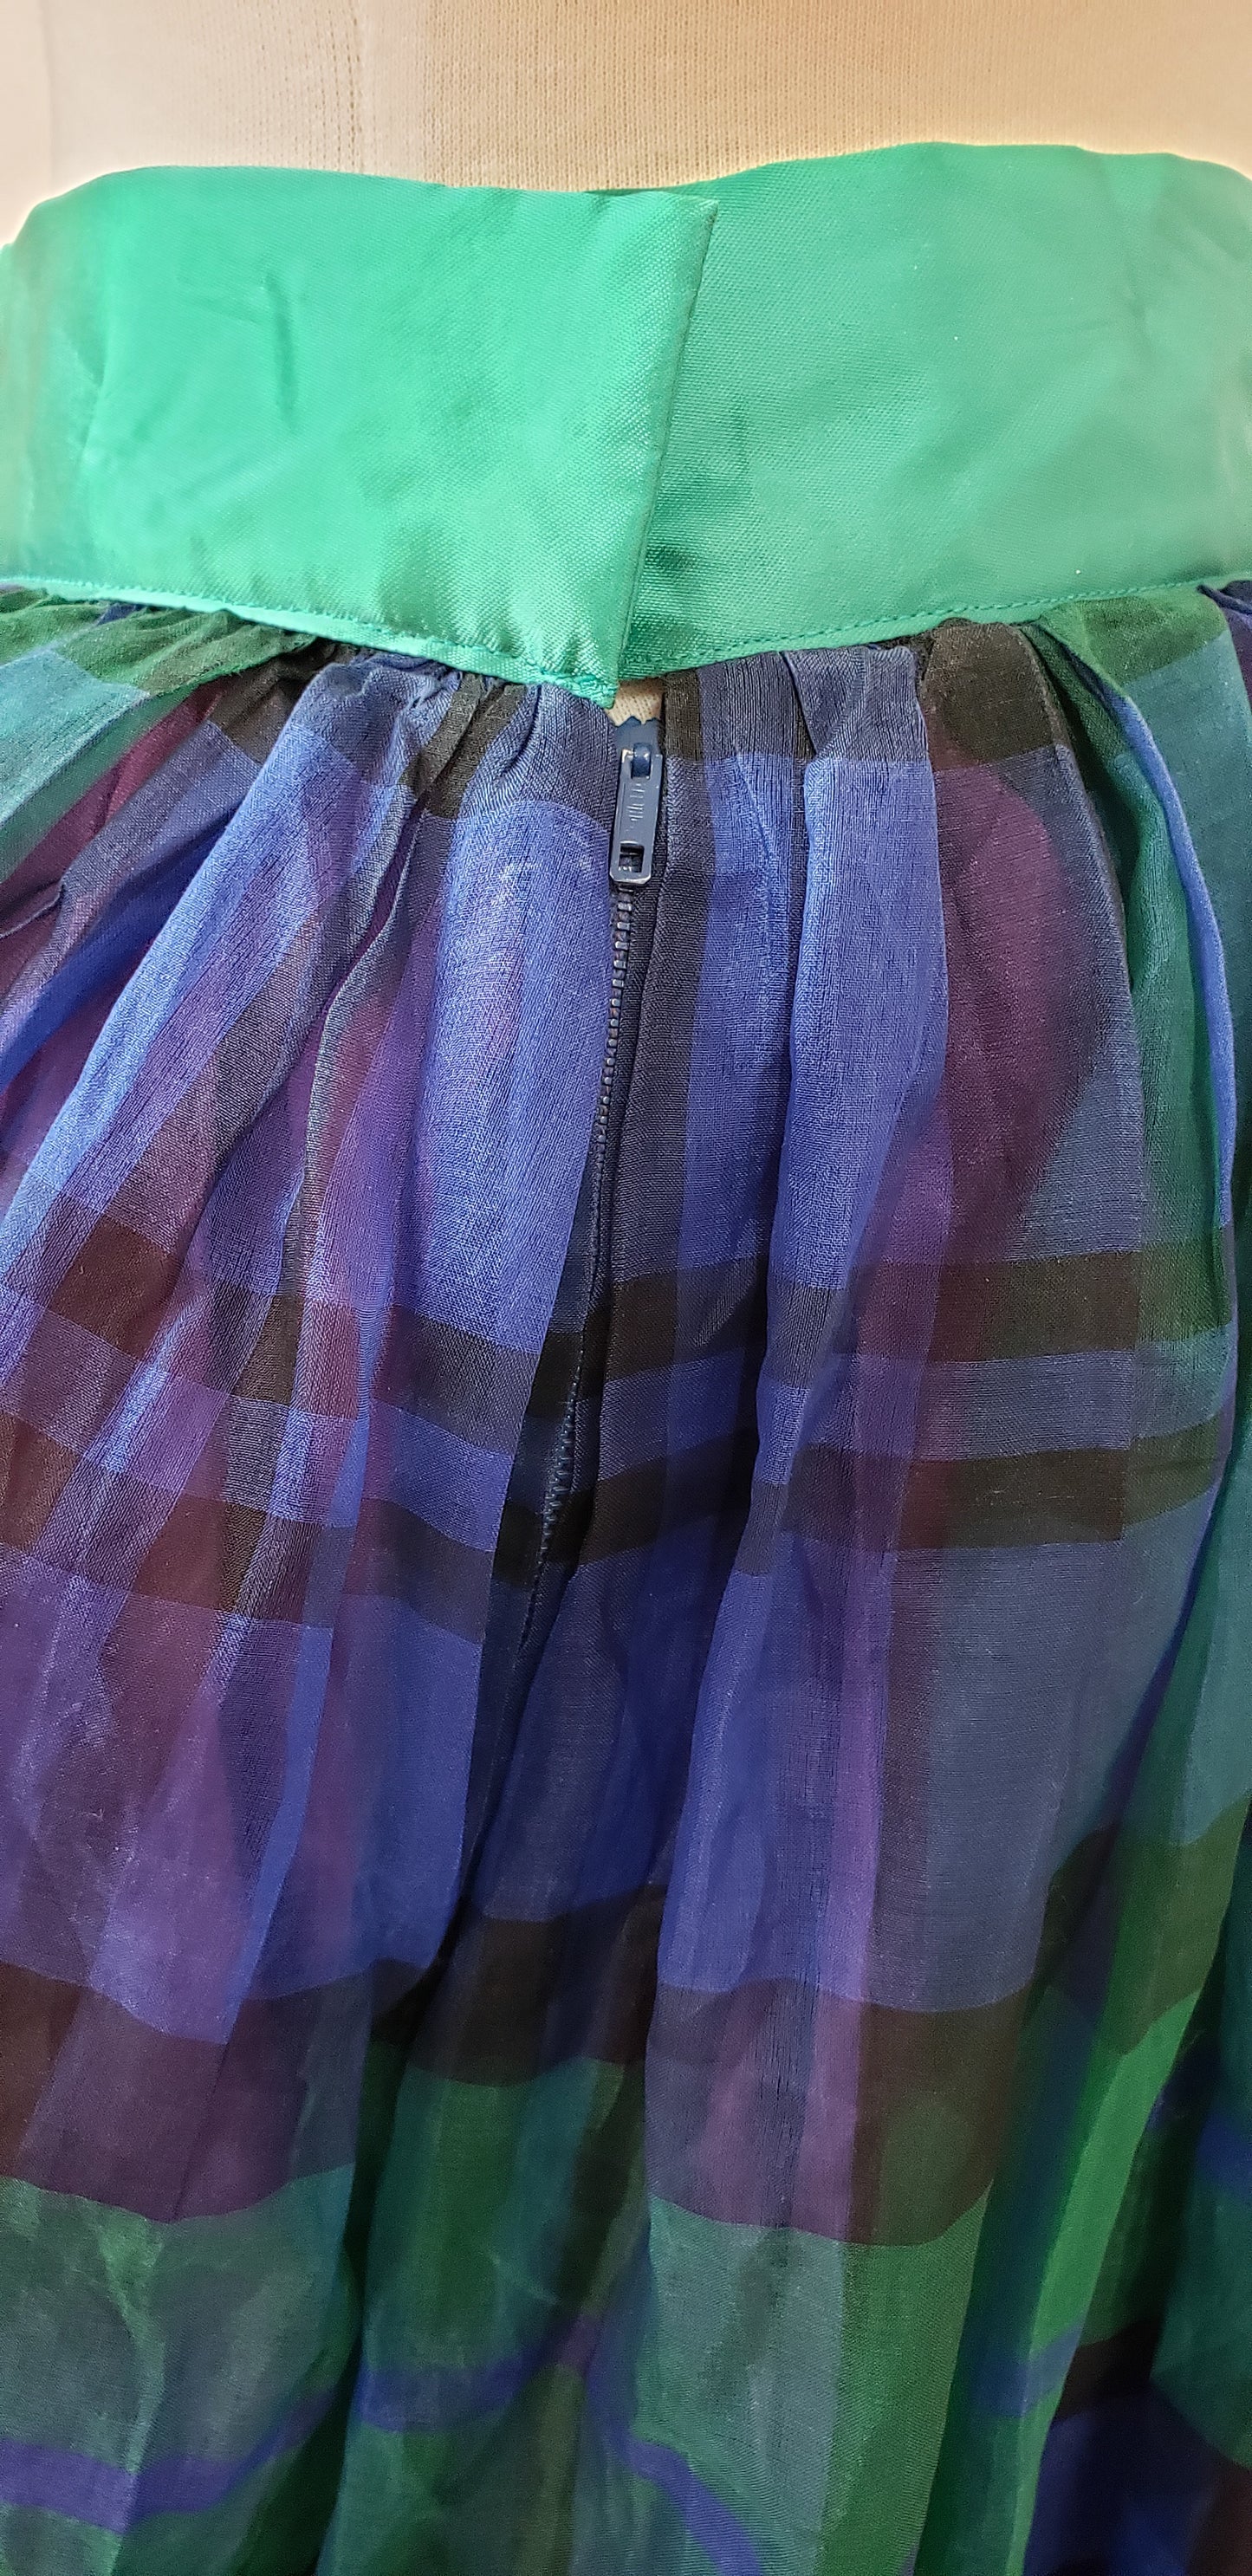 Vintage blue and green plaid skirt